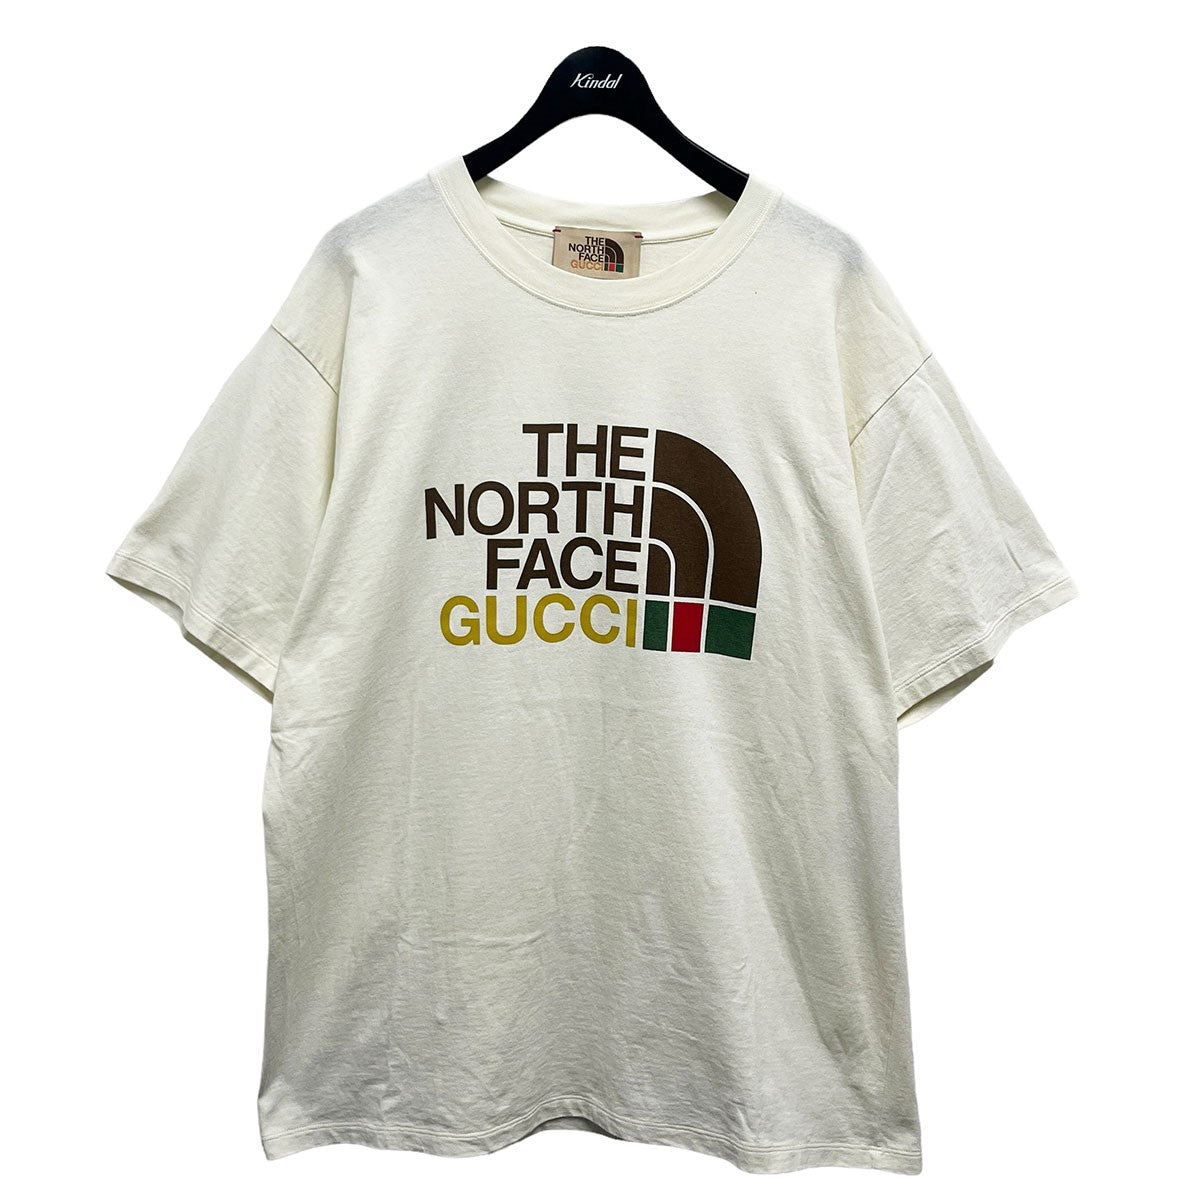 GUCCI × THE NORTH FACE 21SS Over size T-shirt オーバーサイズ 